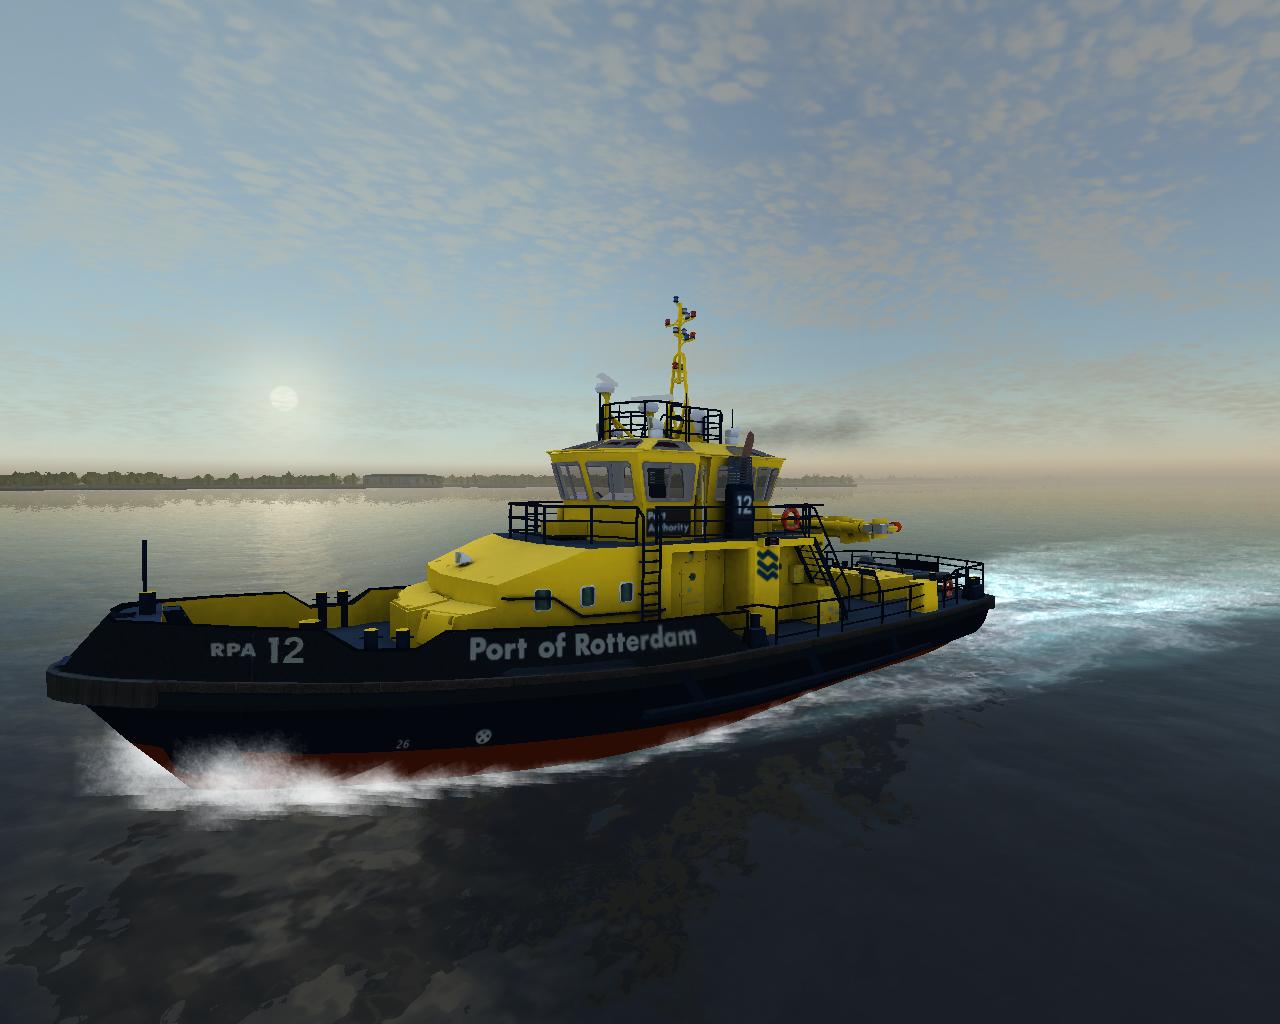 free ship simulator game by planetinaction.com